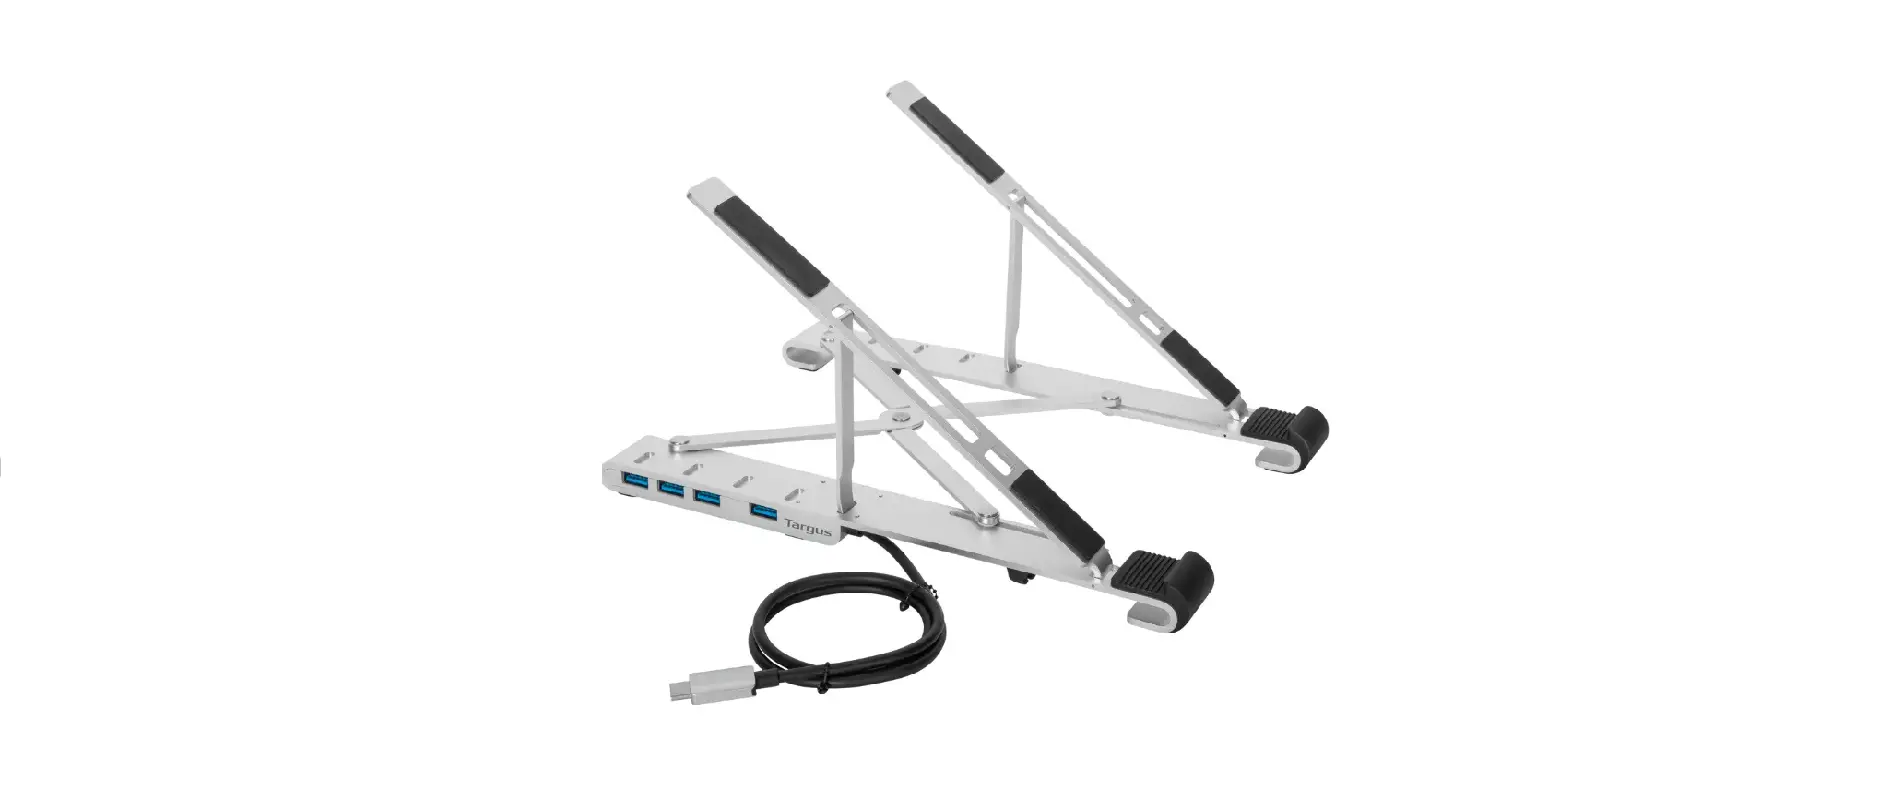 AWU100205GL Portable Laptop Stand + Integrated USB-A Hub